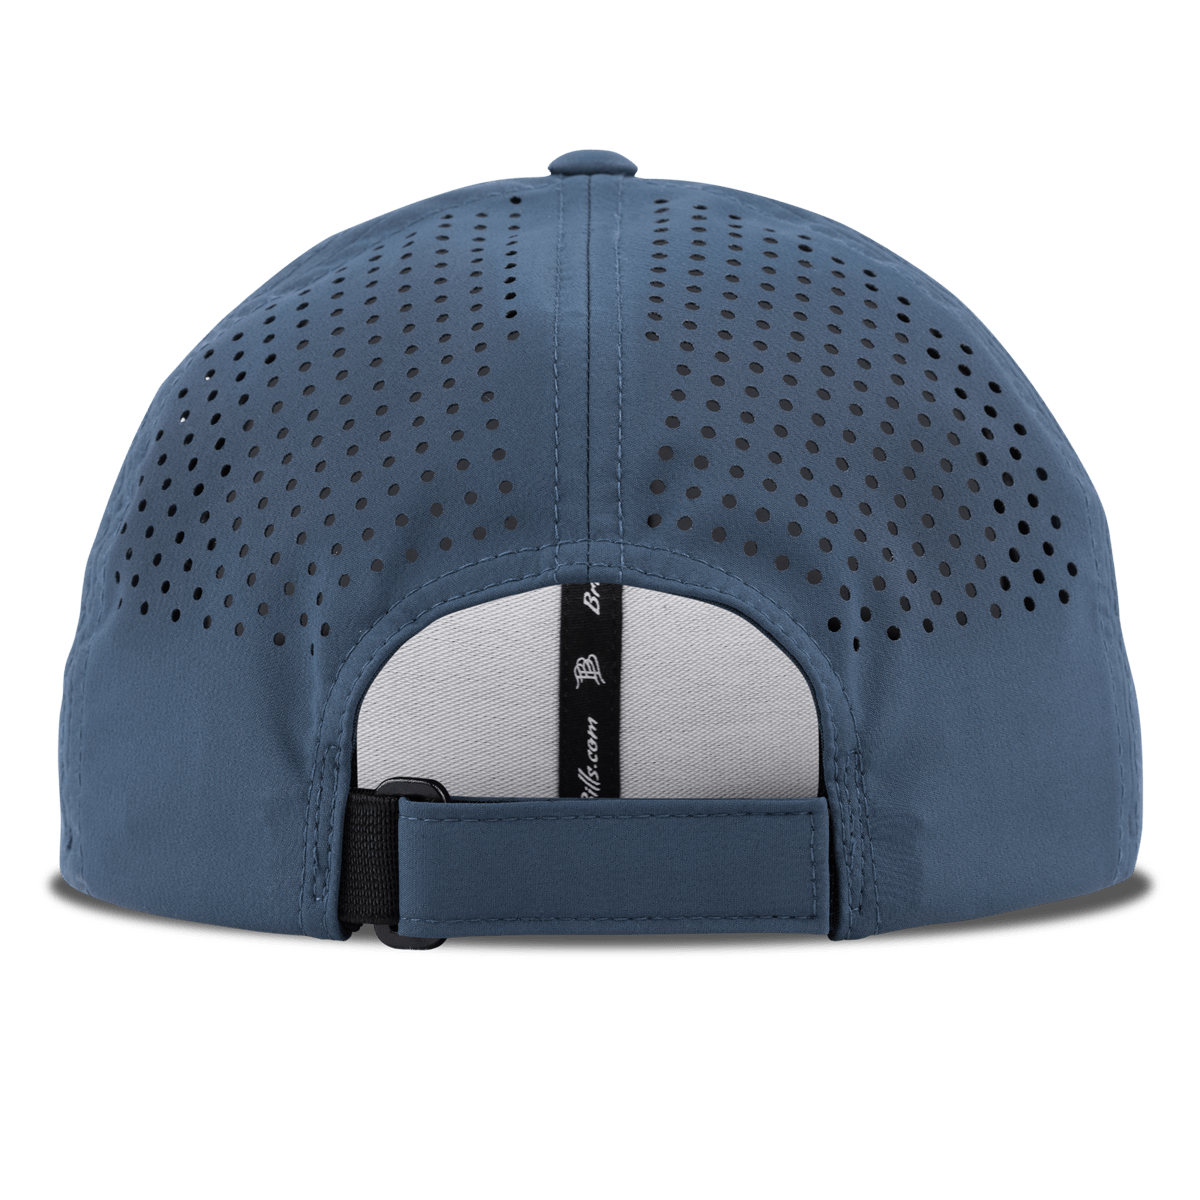 New Mexico 47 Curved Performance Back Navy